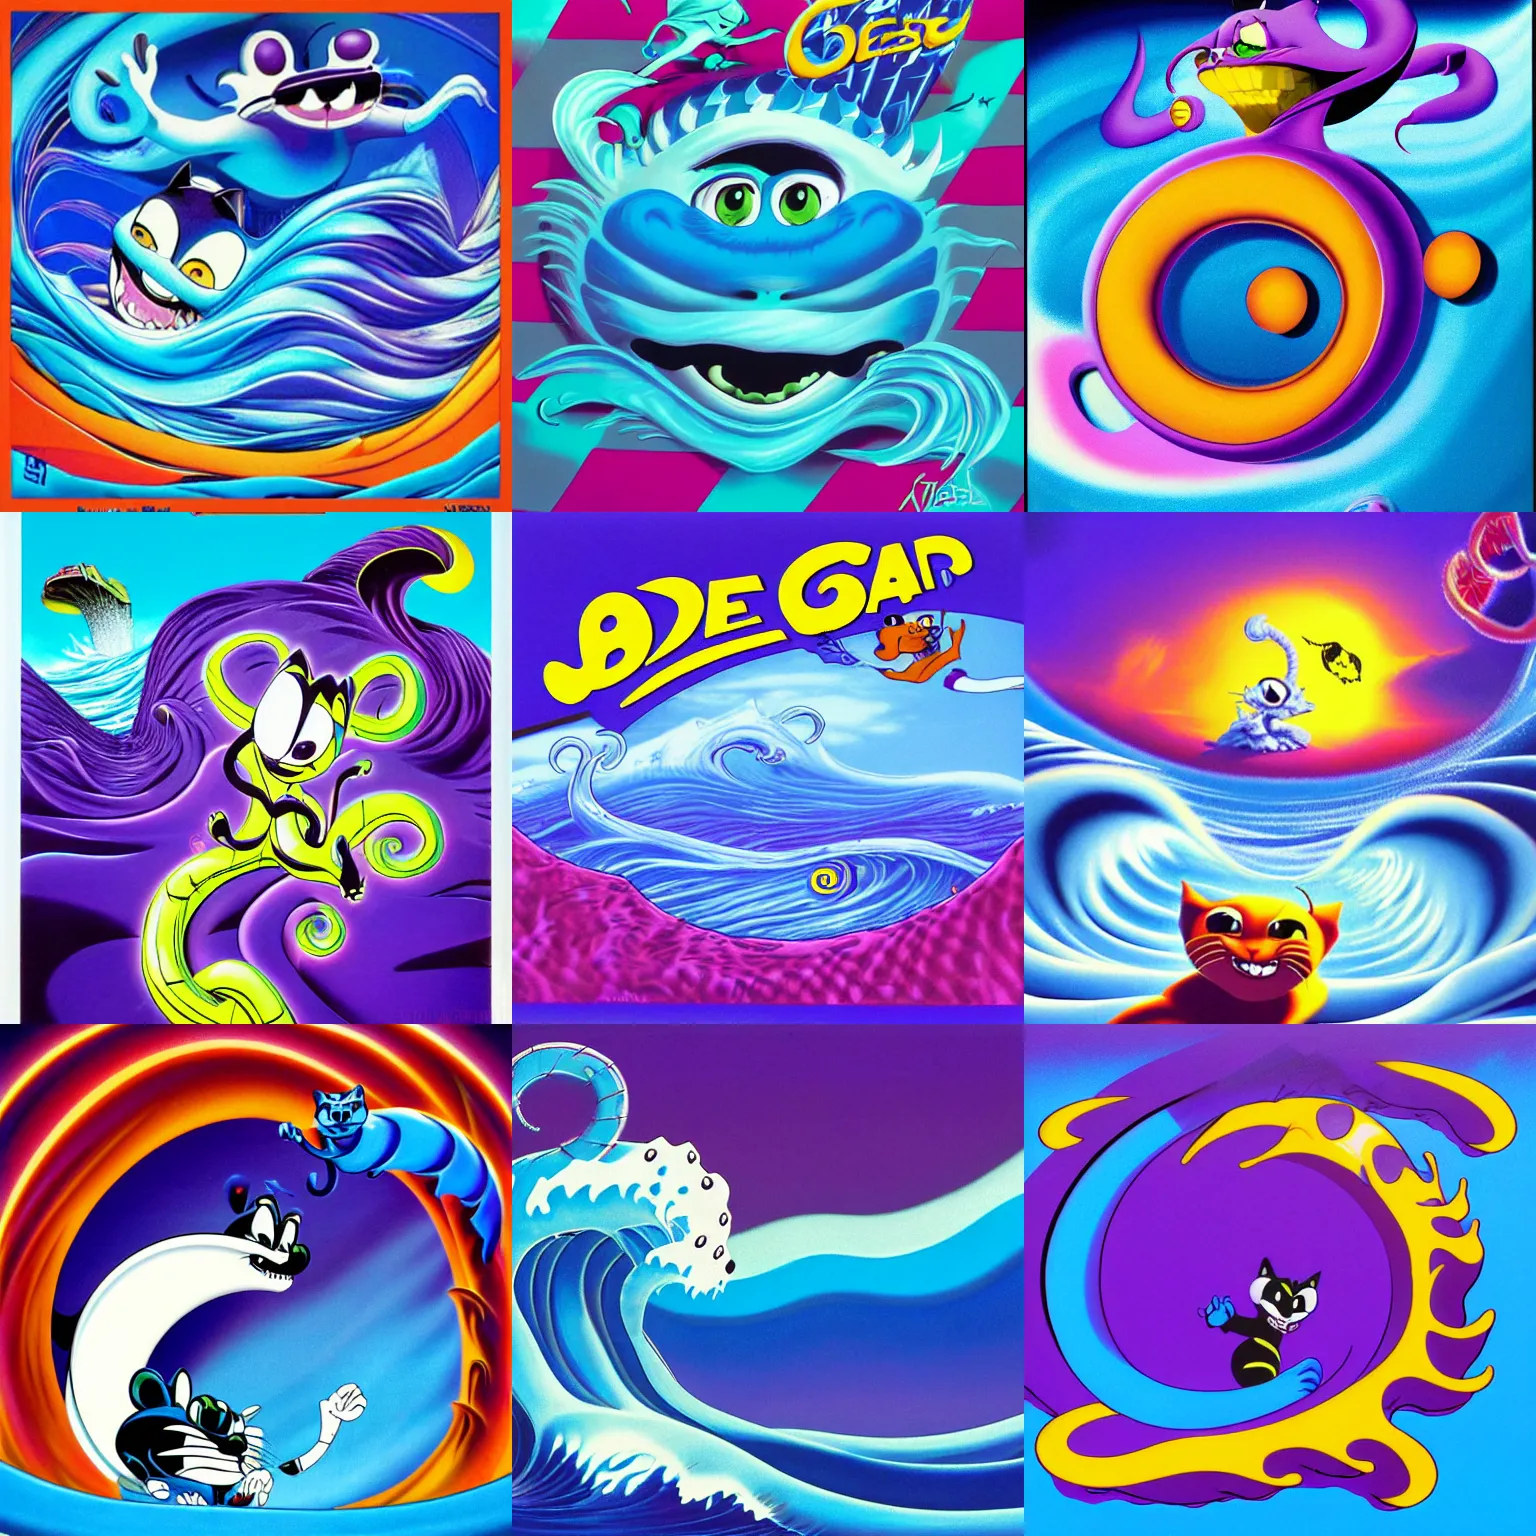 Prompt: surreal, sharp, detailed professional, high quality airbrush art album cover of a blue cresting ocean wave in the shape of felix the cat, purple checkerboard background, 1990s 1992 style of John Kricfalusi, Sega Genesis box art